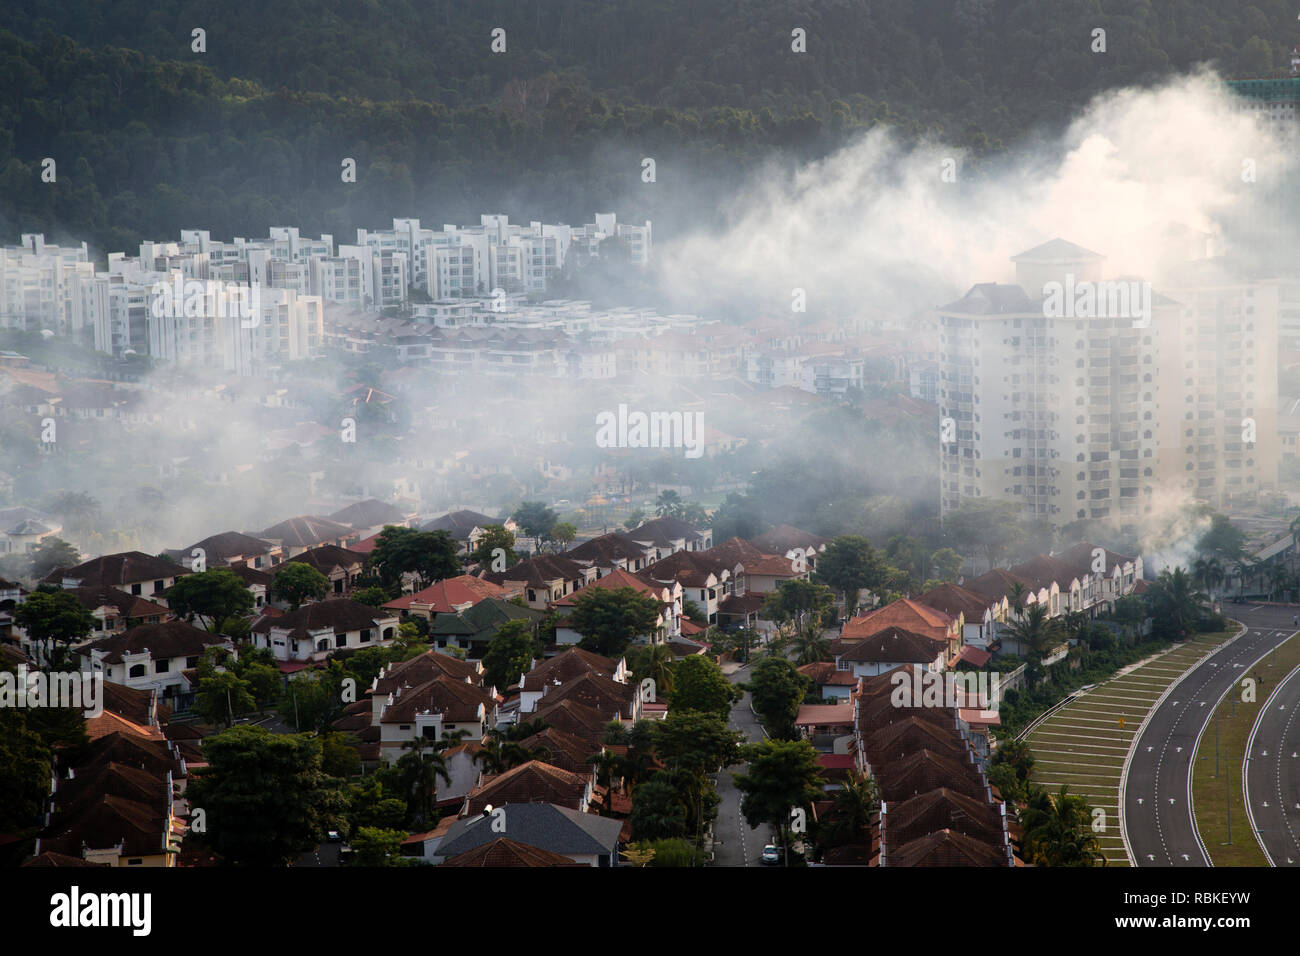 Spraying insecticide smoke known as mosquito fogging to prevent the spread of dengue fever in Batu Ferringhi on Penand Island, Malaysia. Stock Photo